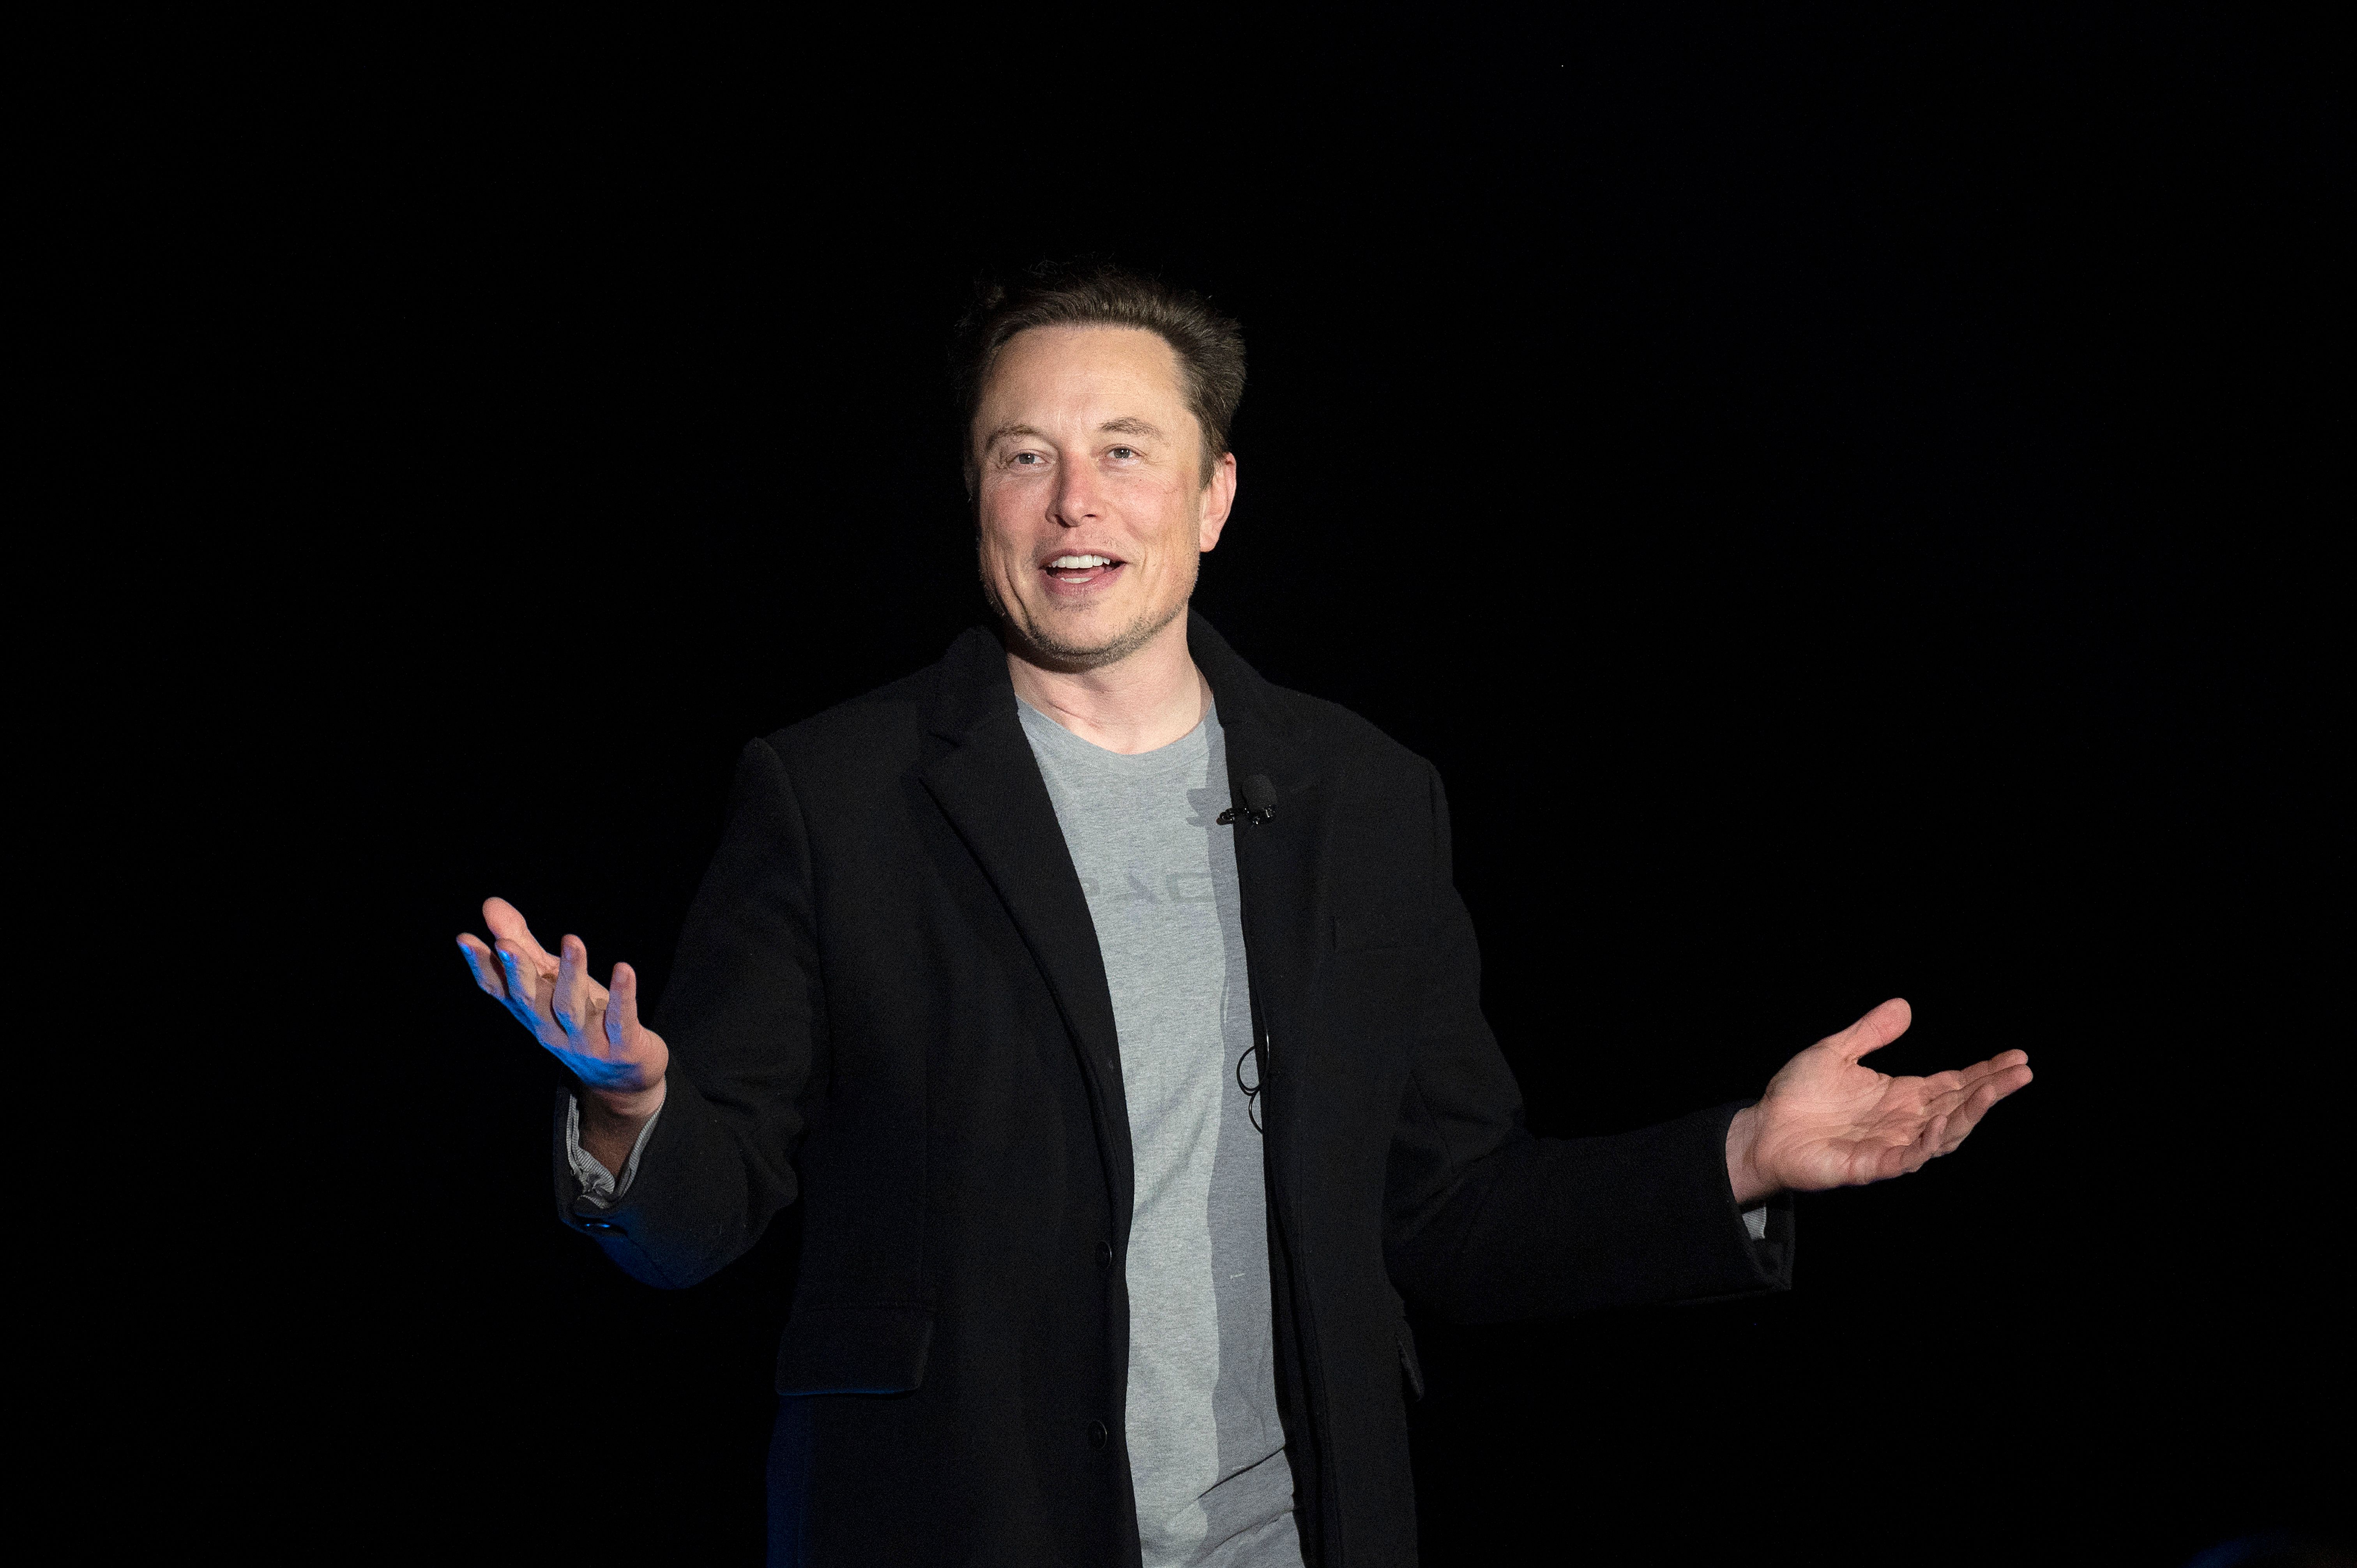 Elon Musk speaks at a SpaceX conference in Feb. 2022